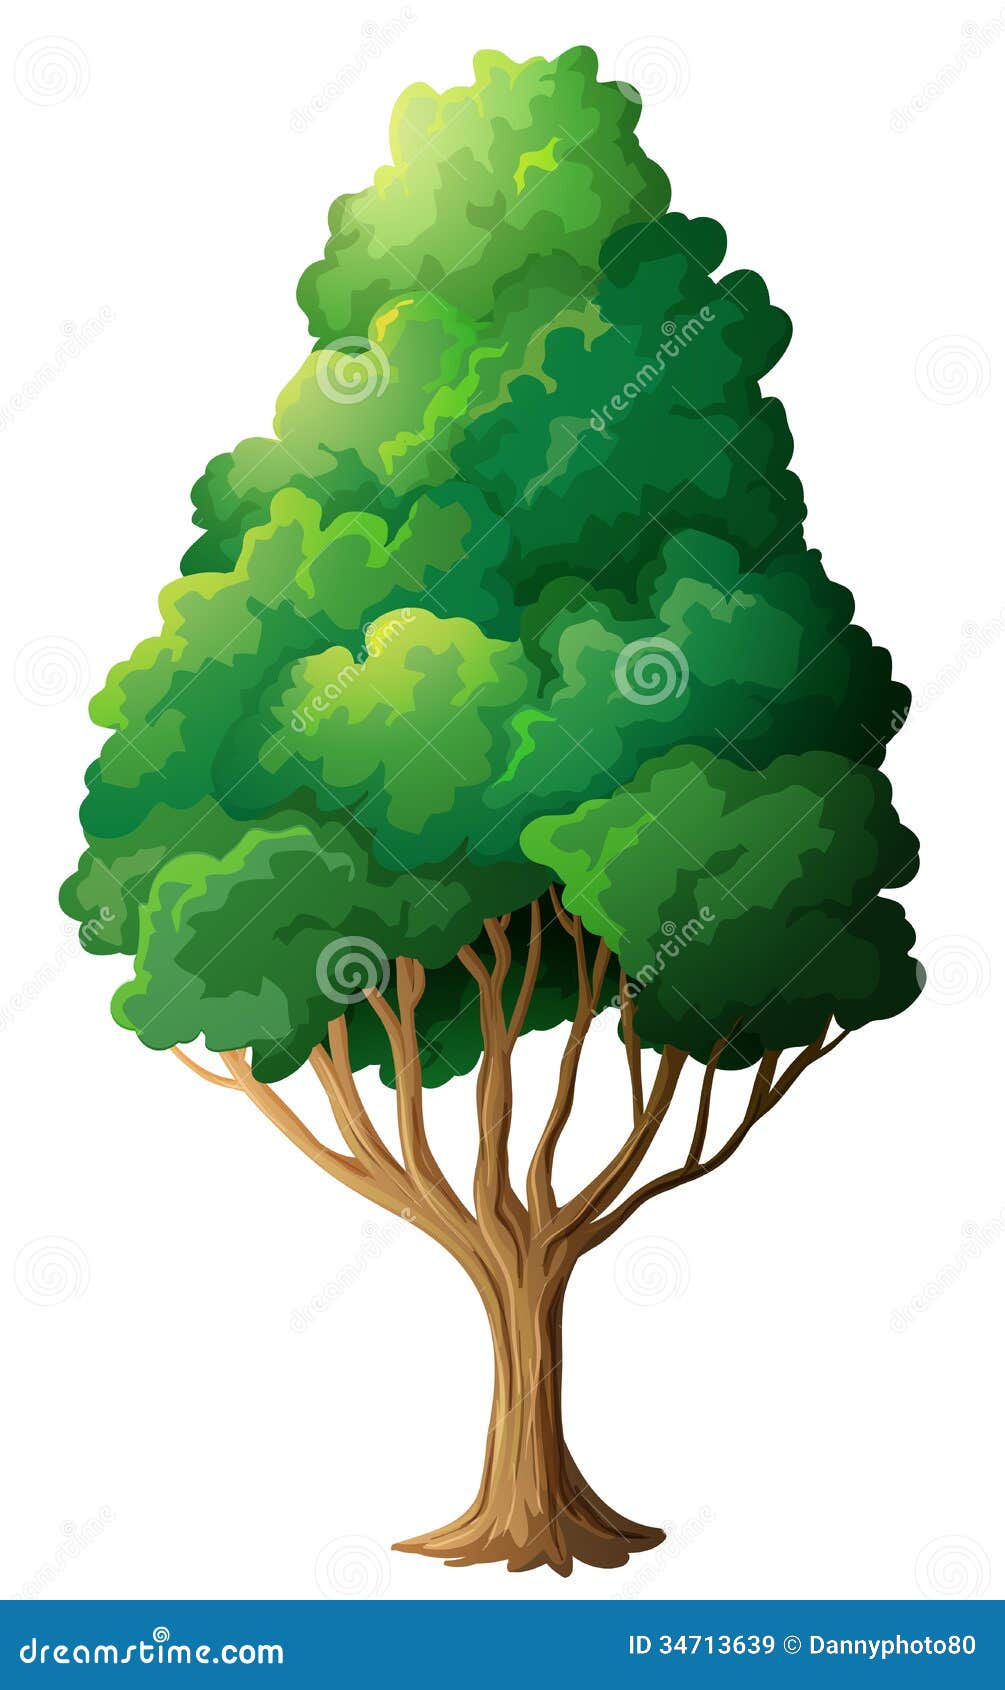 A tall old tree stock vector. Illustration of surrounding ...